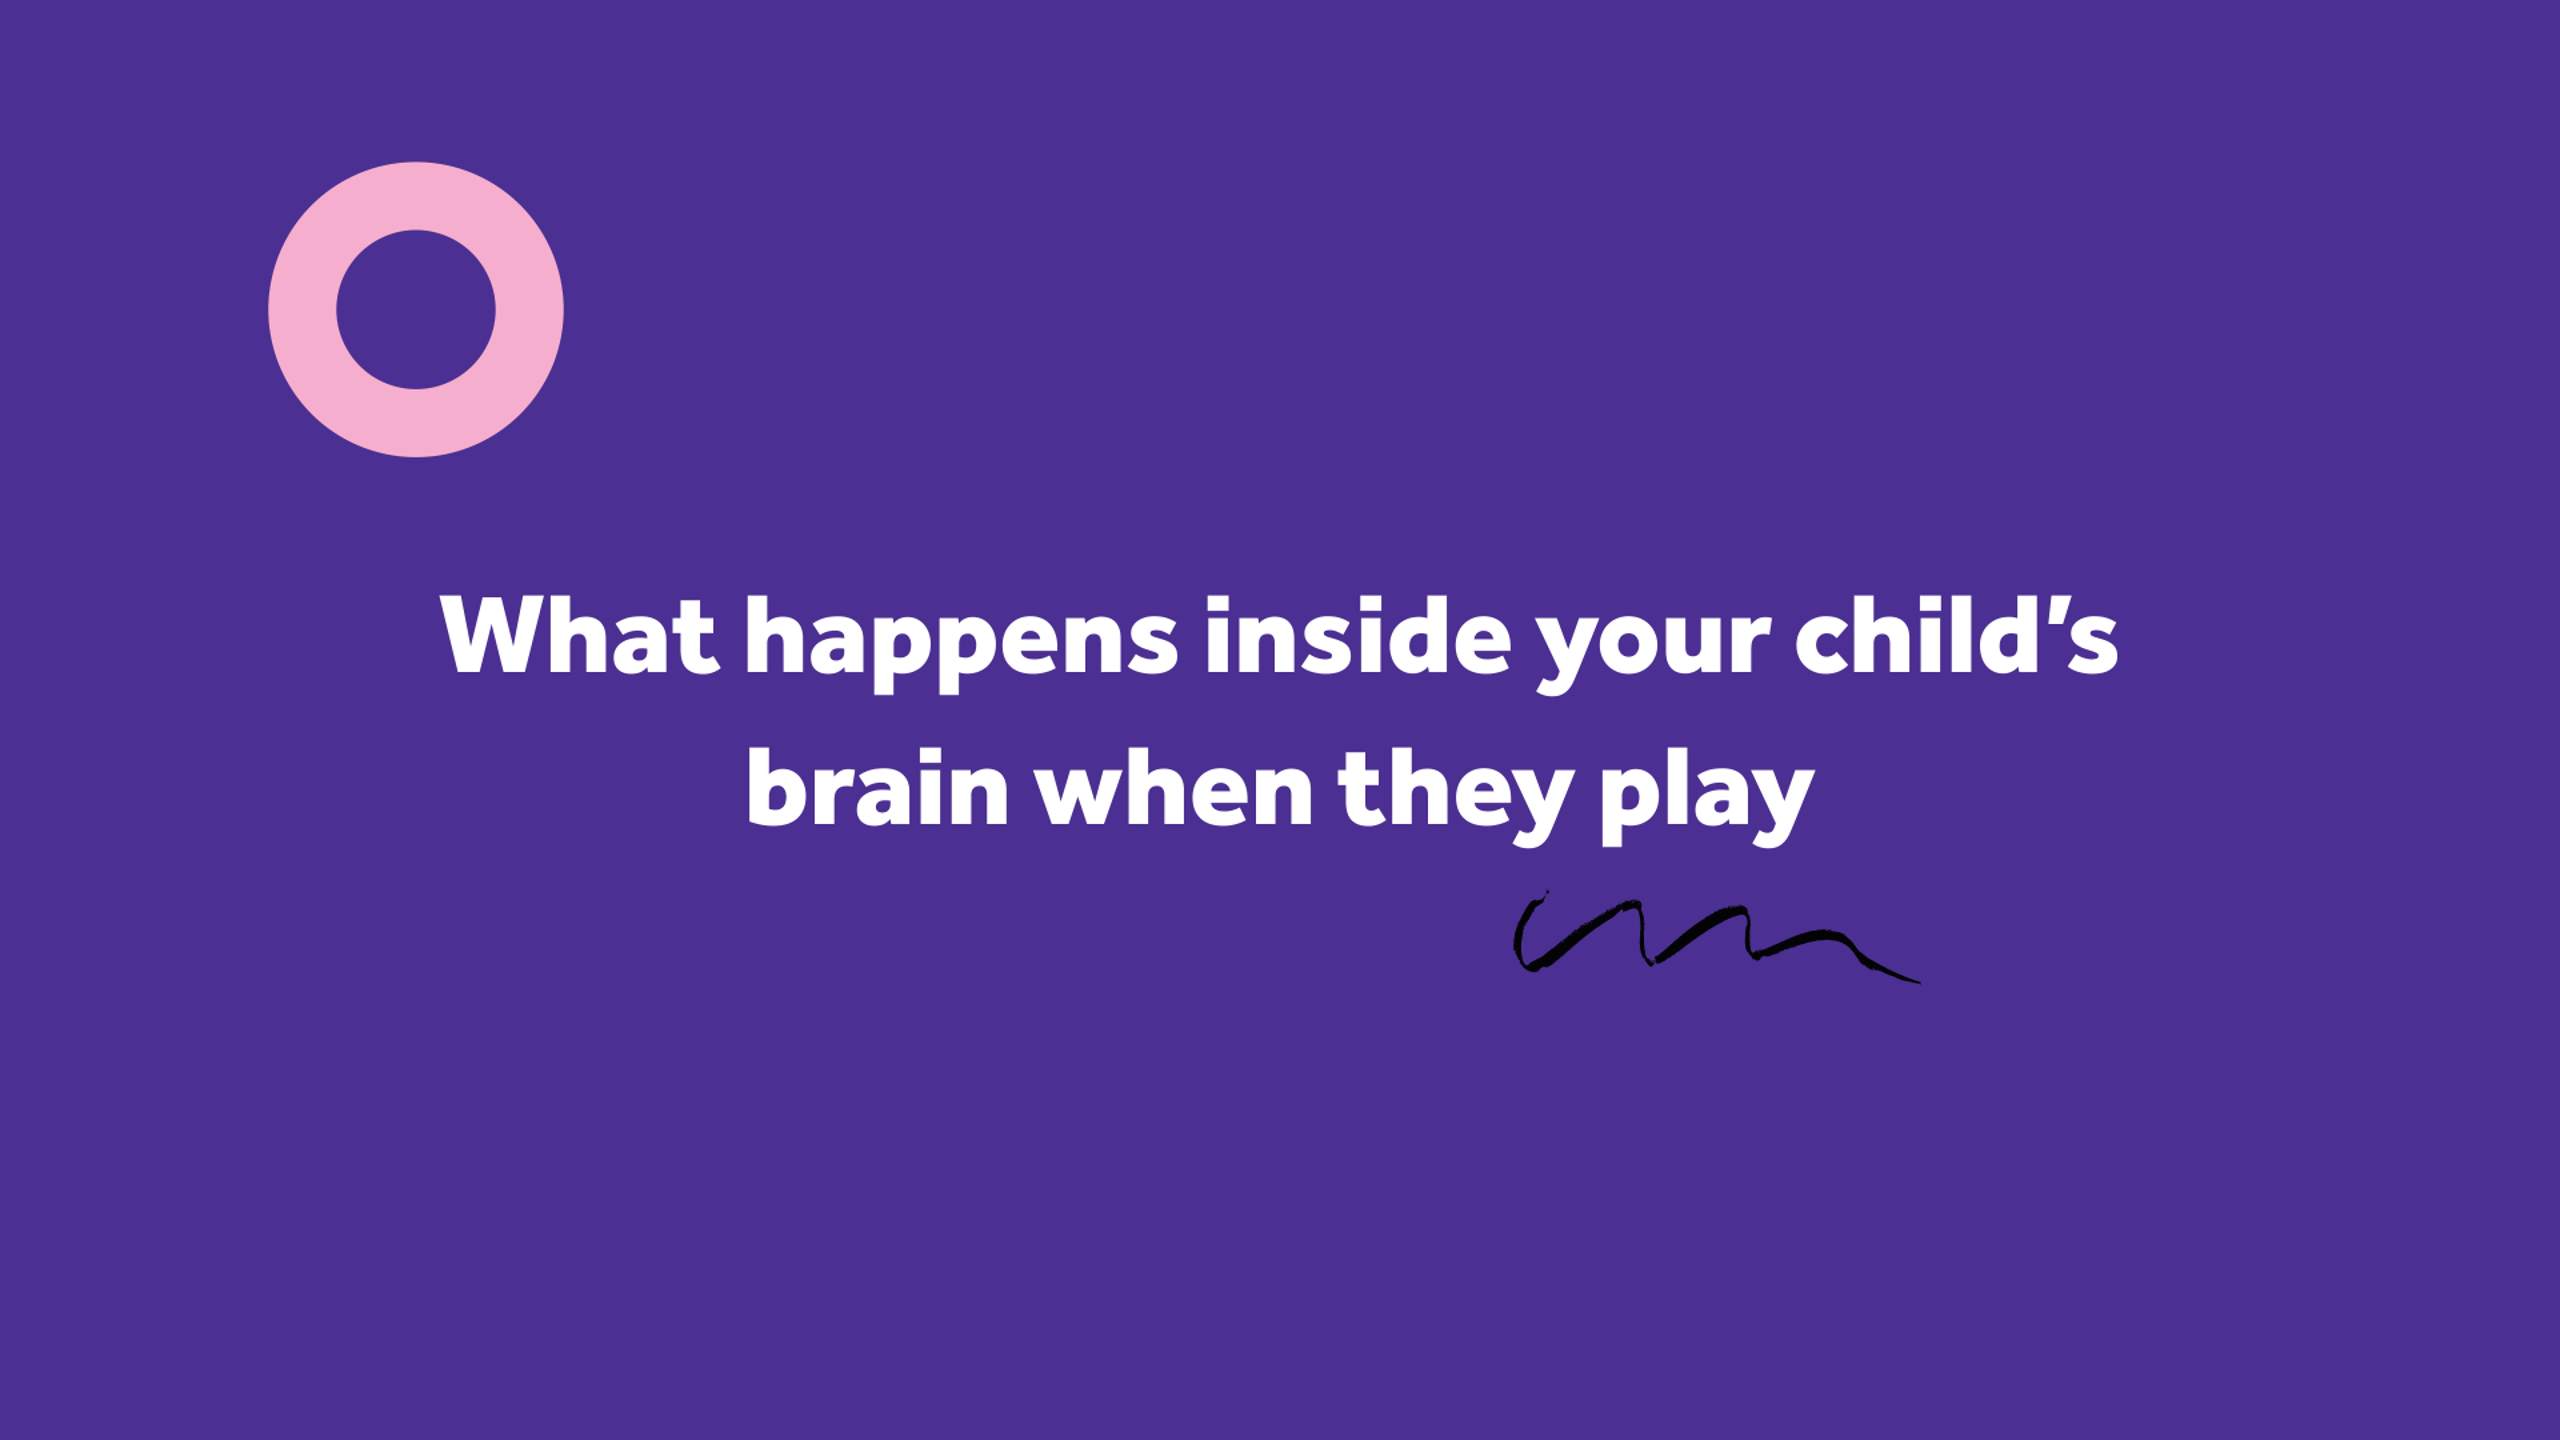 The neuroscience of learning through play